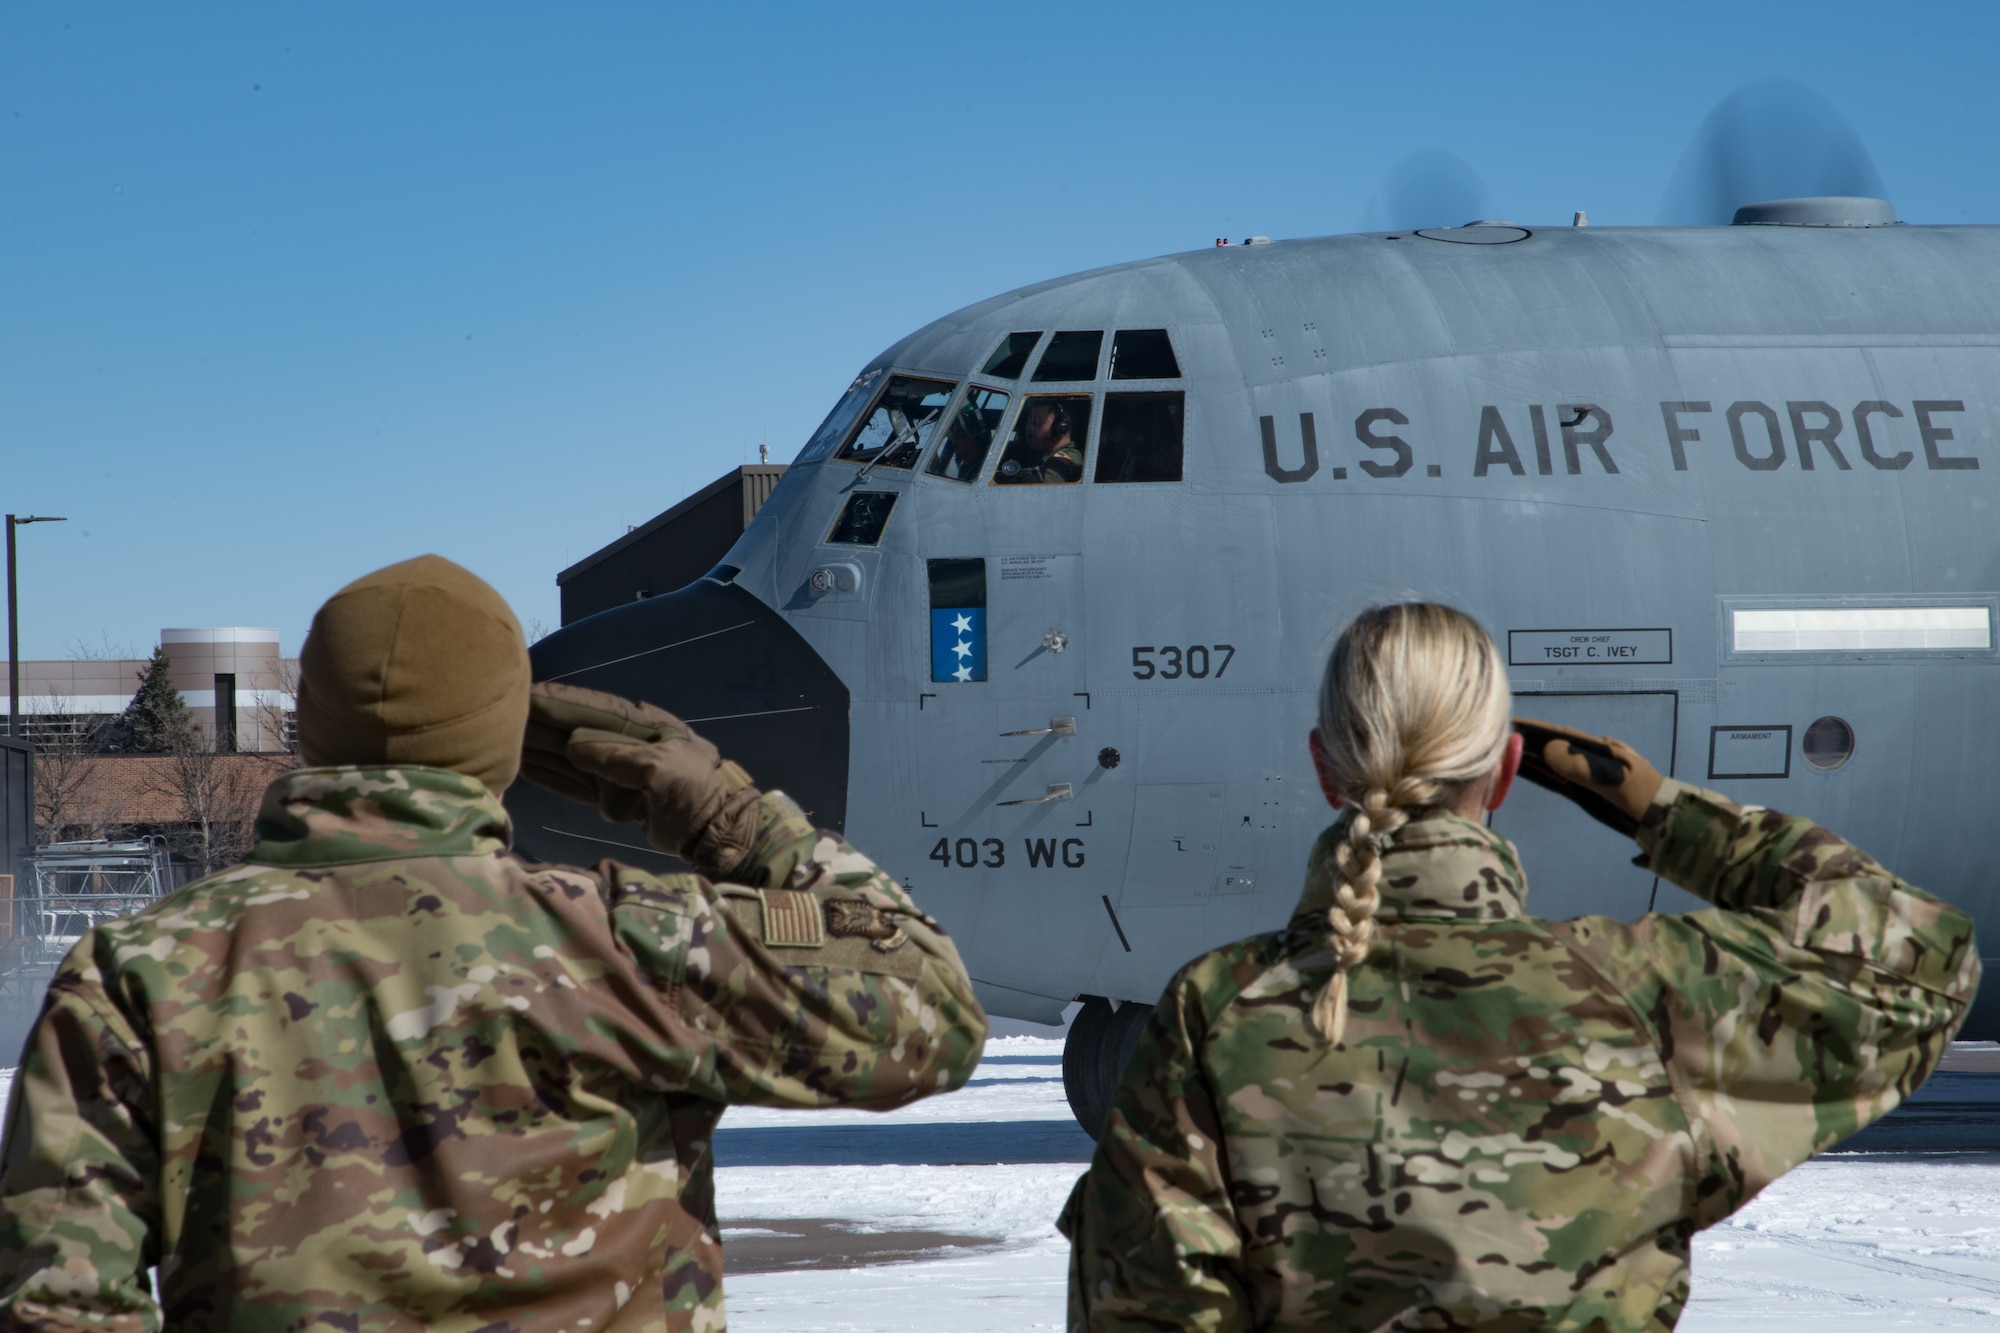 One man and one woman in uniform salute a 403rd Wing C-130 aircraft with 3 stars in the lower window.